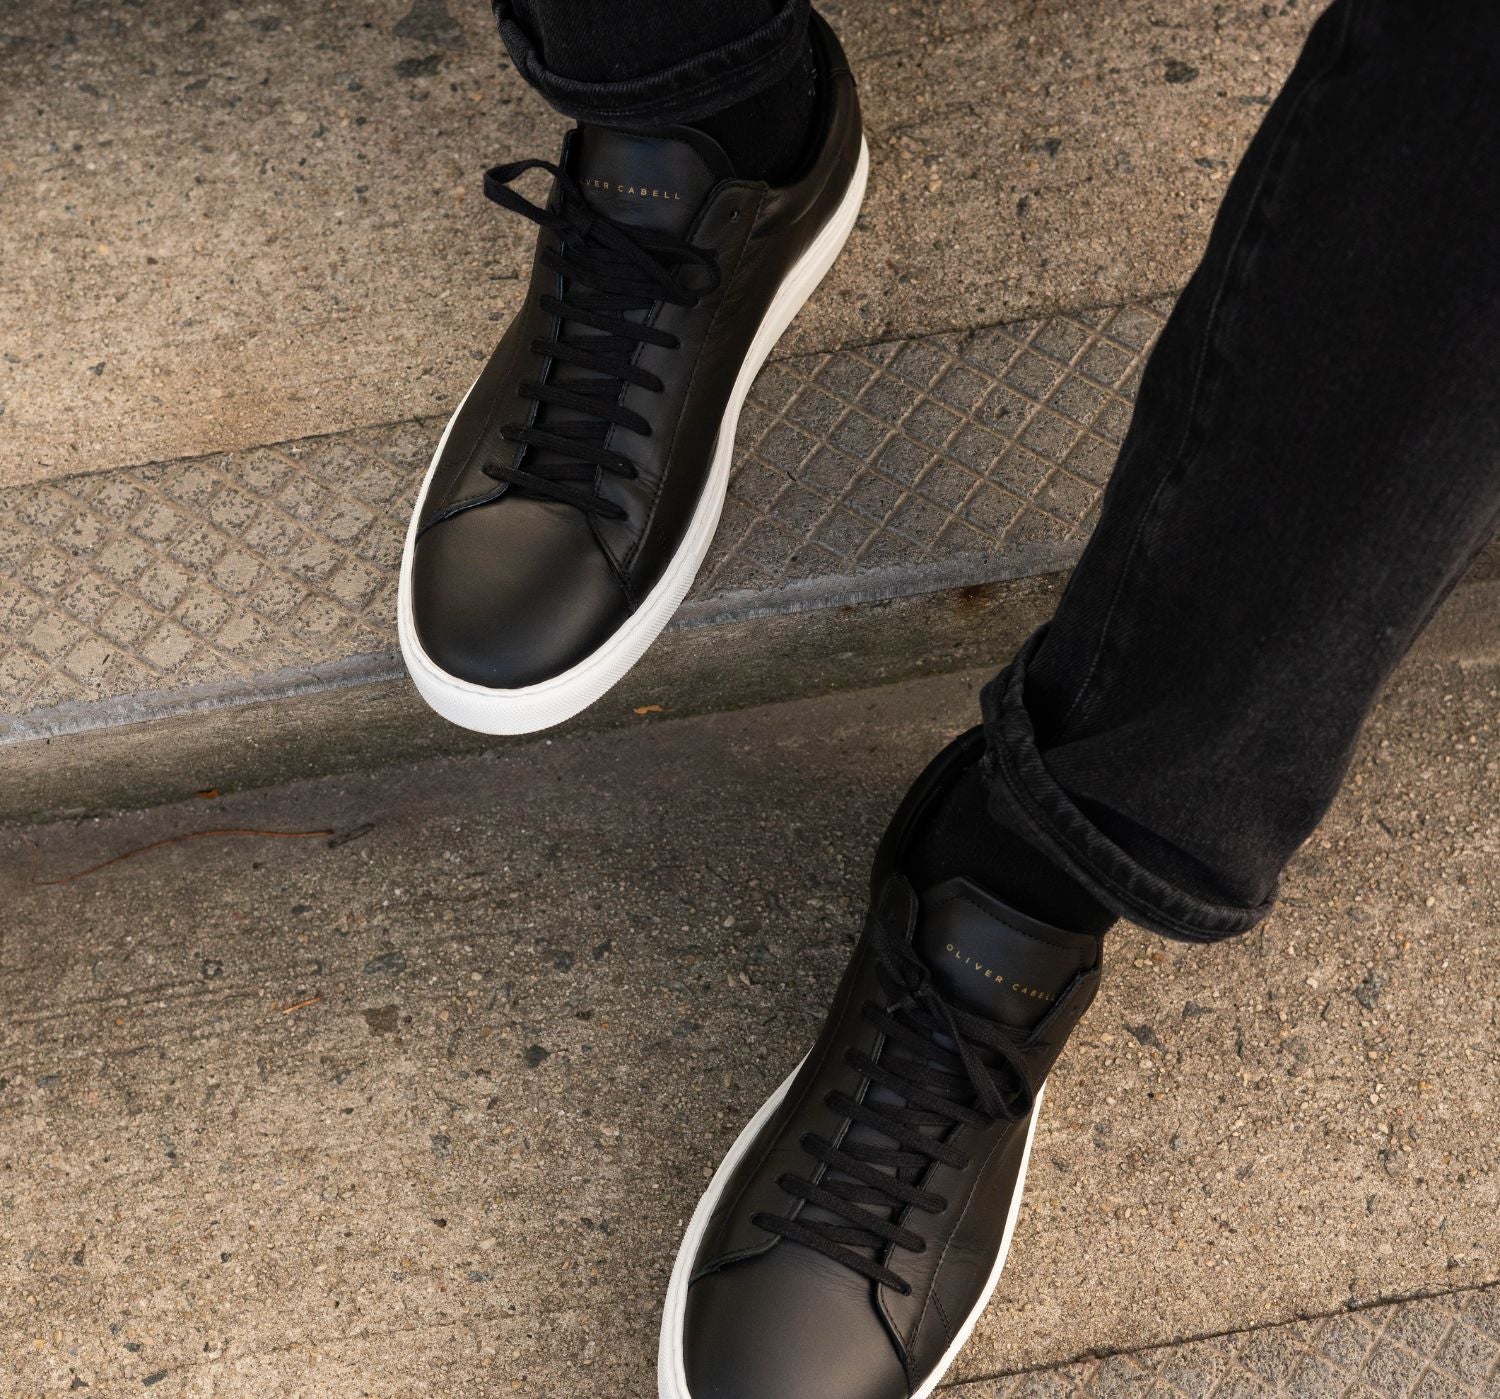 Find Your Swagger With the Best Men's Black Sneakers - Oliver Cabell